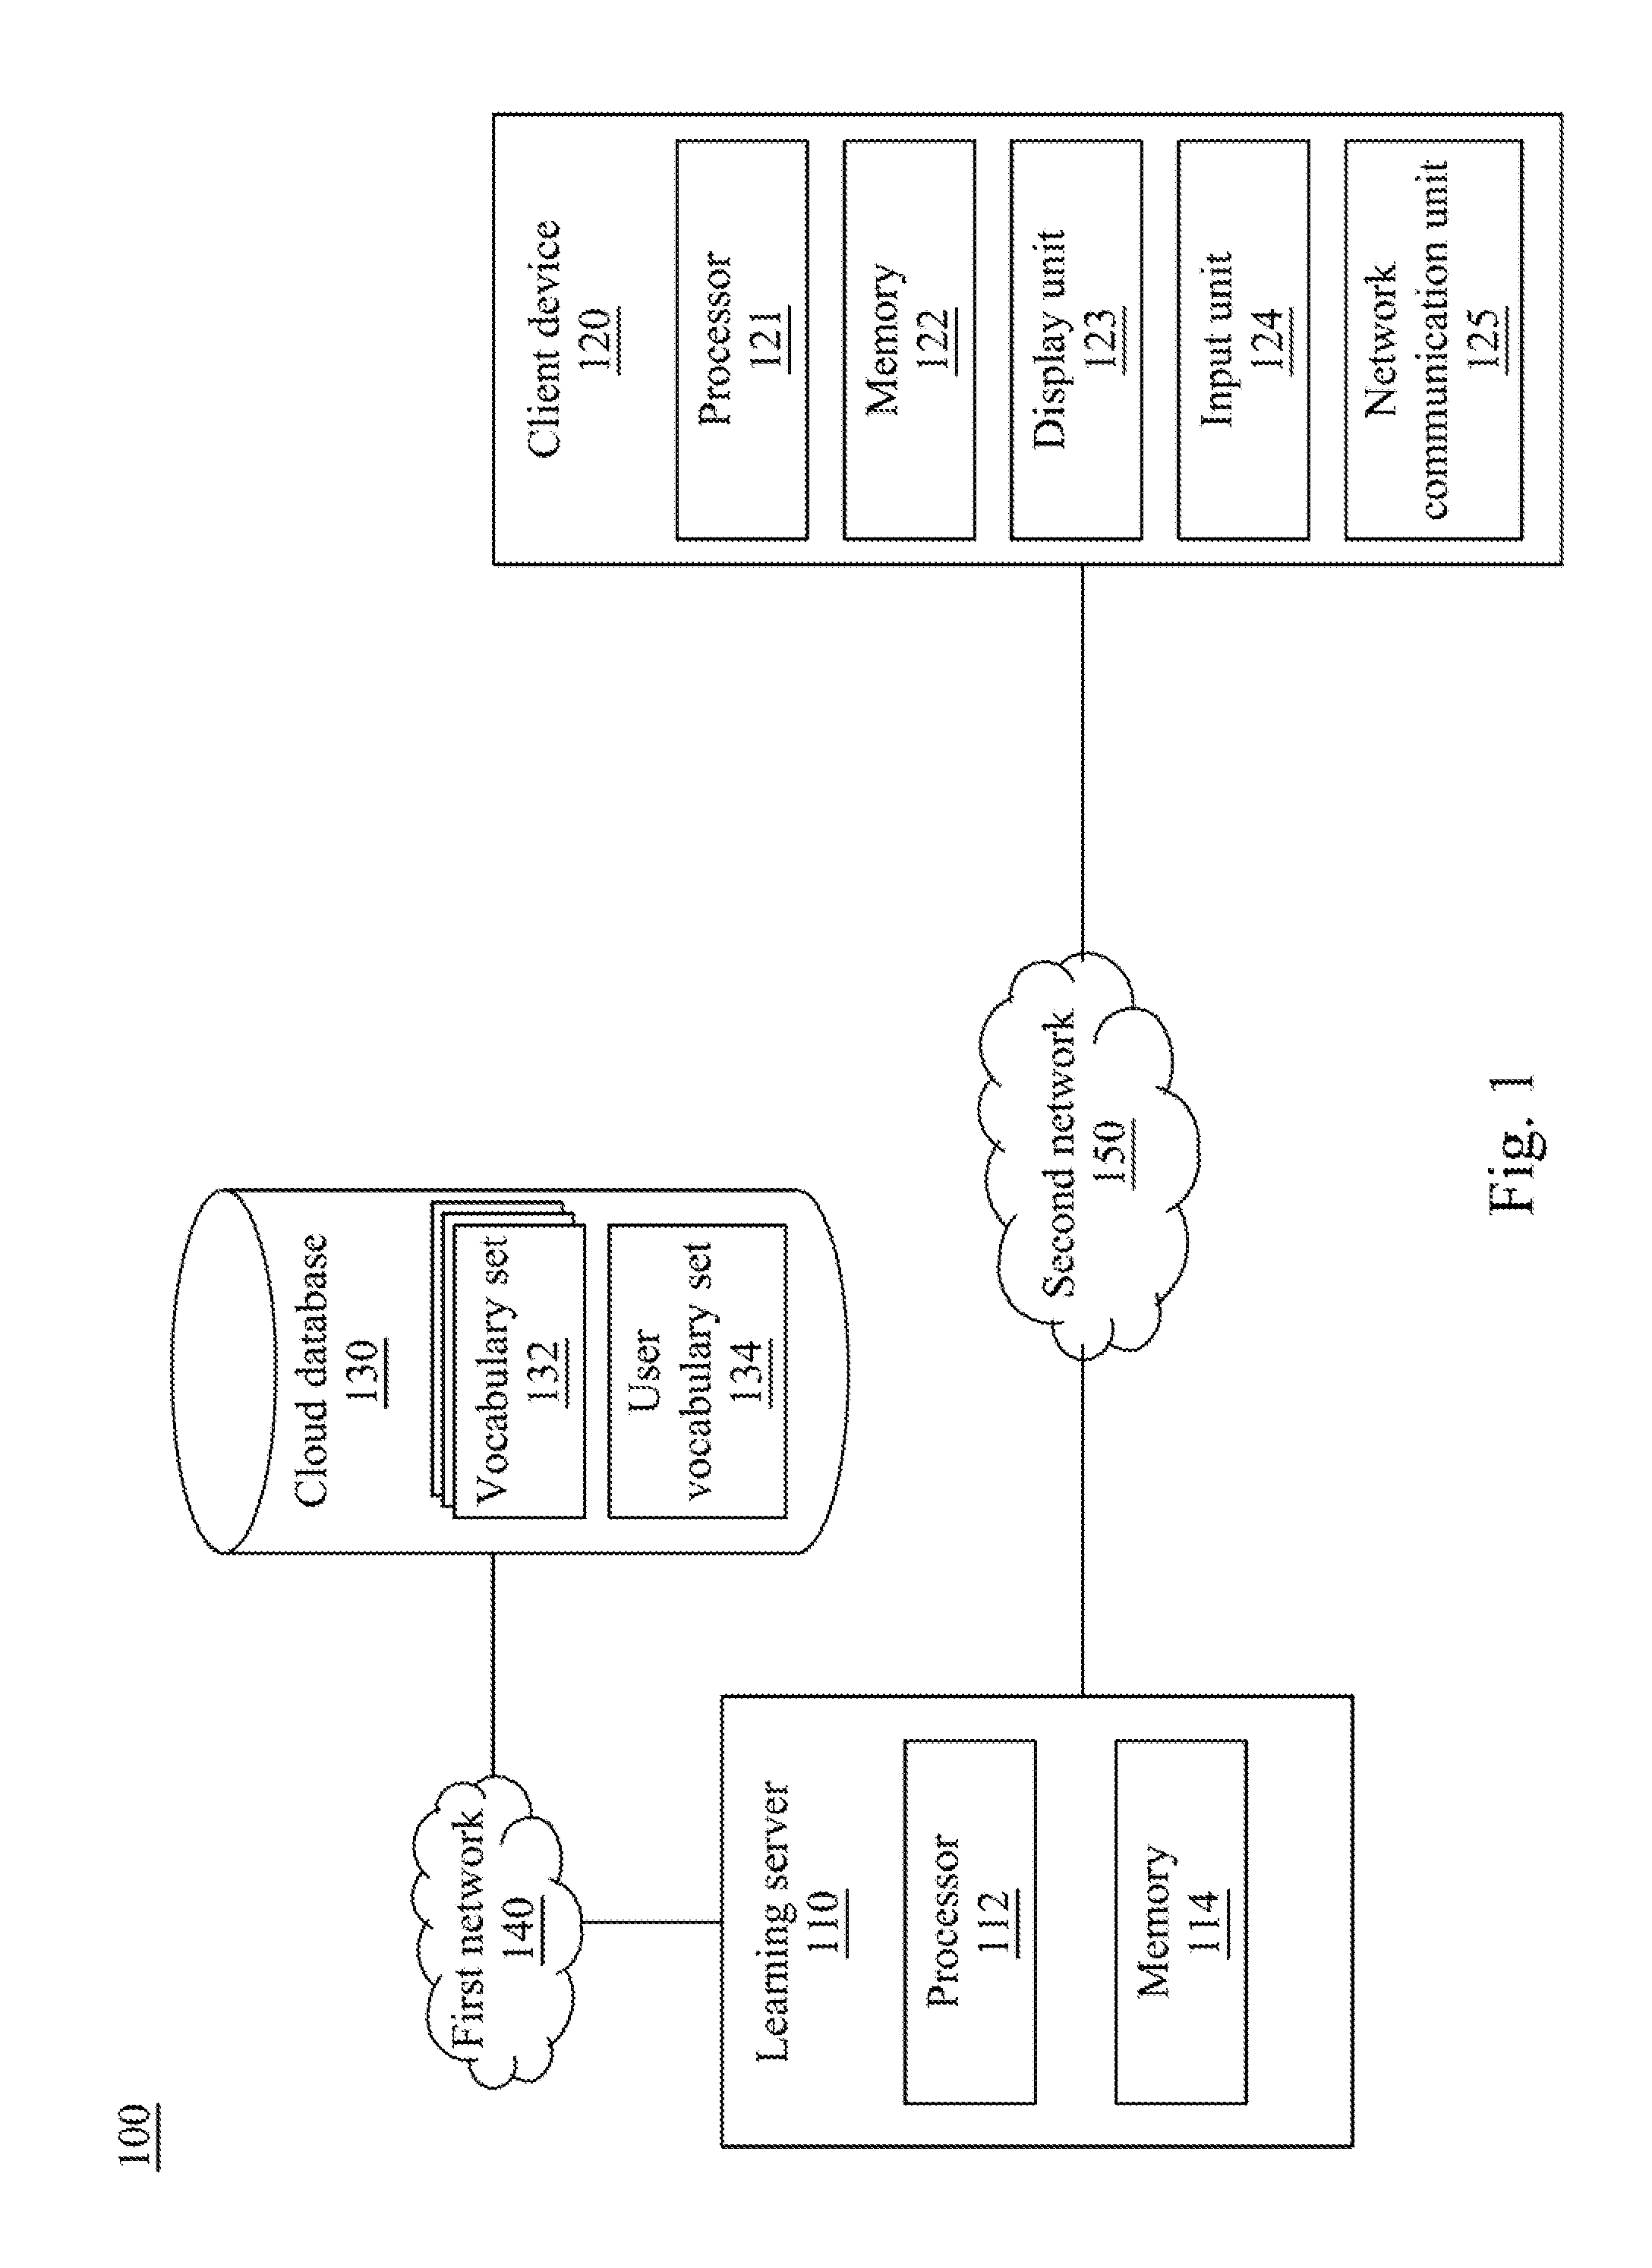 Cloud-based vocabulary learning system and method